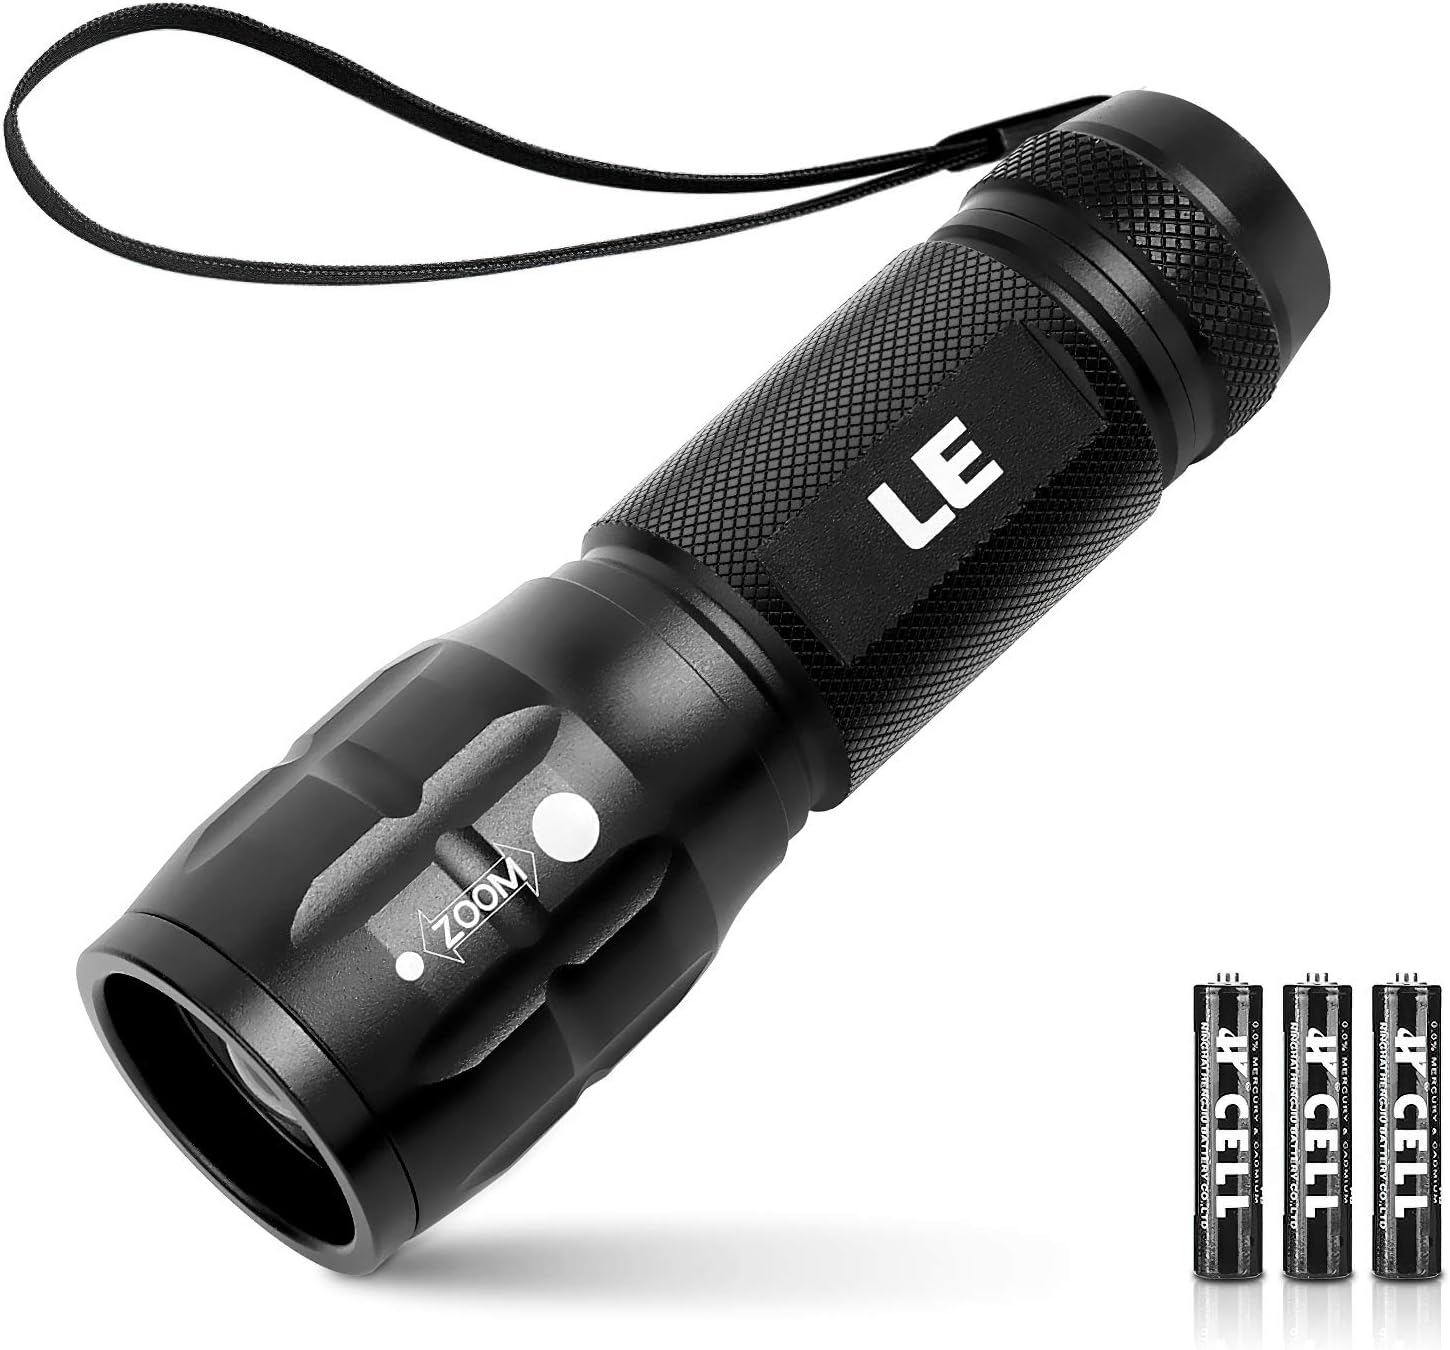 Lighting EVER LE LED Flashlight LE1000 High Lumens, Small and Extremely Bright Flash Light, Zoomable, Water Resistant, Adjustable Brightness